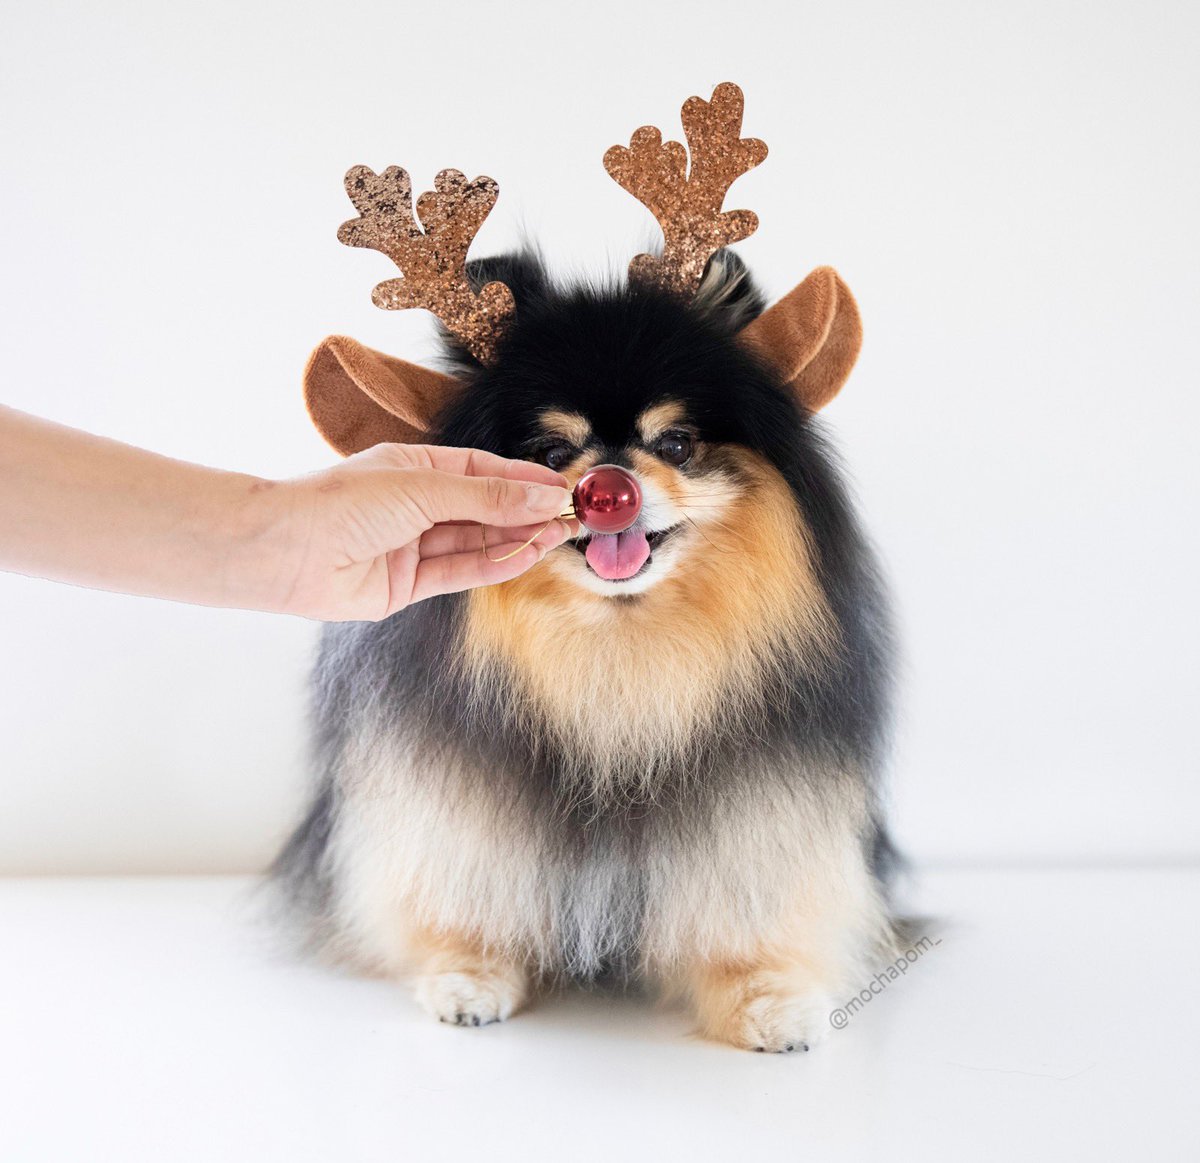 Rudolph the red nosed reindeer #dog #cute #animal